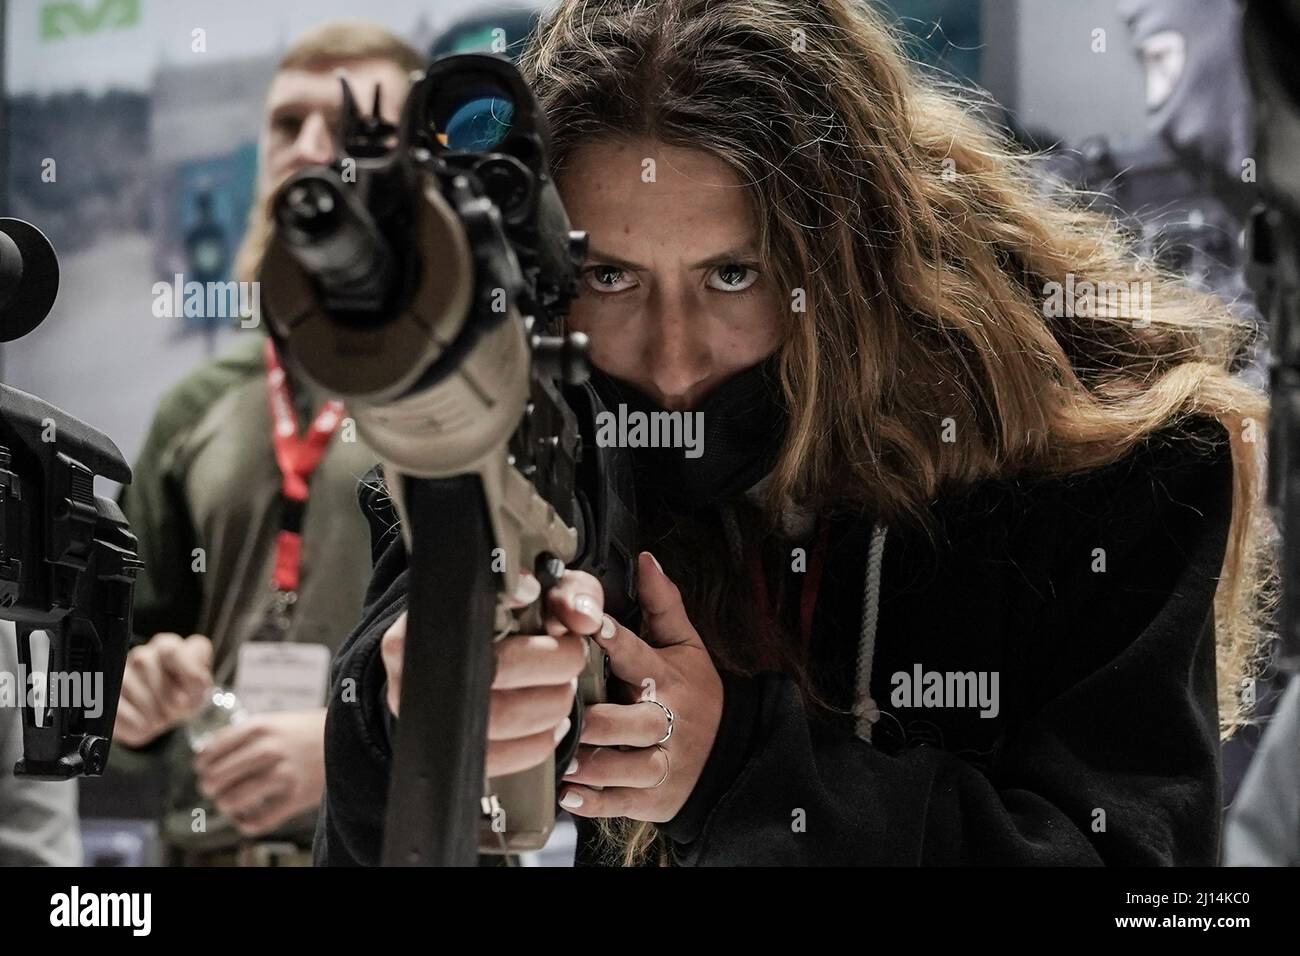 Tel Aviv, Israel. 22nd March, 2022. A woman examines a rifle at ISDEF, Israel's International Security and Defense exhibition, as it opens at EXPO Tel Aviv. The exhibition highlights equipment and technologies for defense, home land security, mega event protection, cybersecurity, intelligence and counter terrorism. ISDEF hosts over 300 exhibiting companies and will be attended by 10,000 visitors and 50 delegations including first time visitors from the Gulf countries and Morocco. Credit: Nir Alon/Alamy Live News Stock Photo